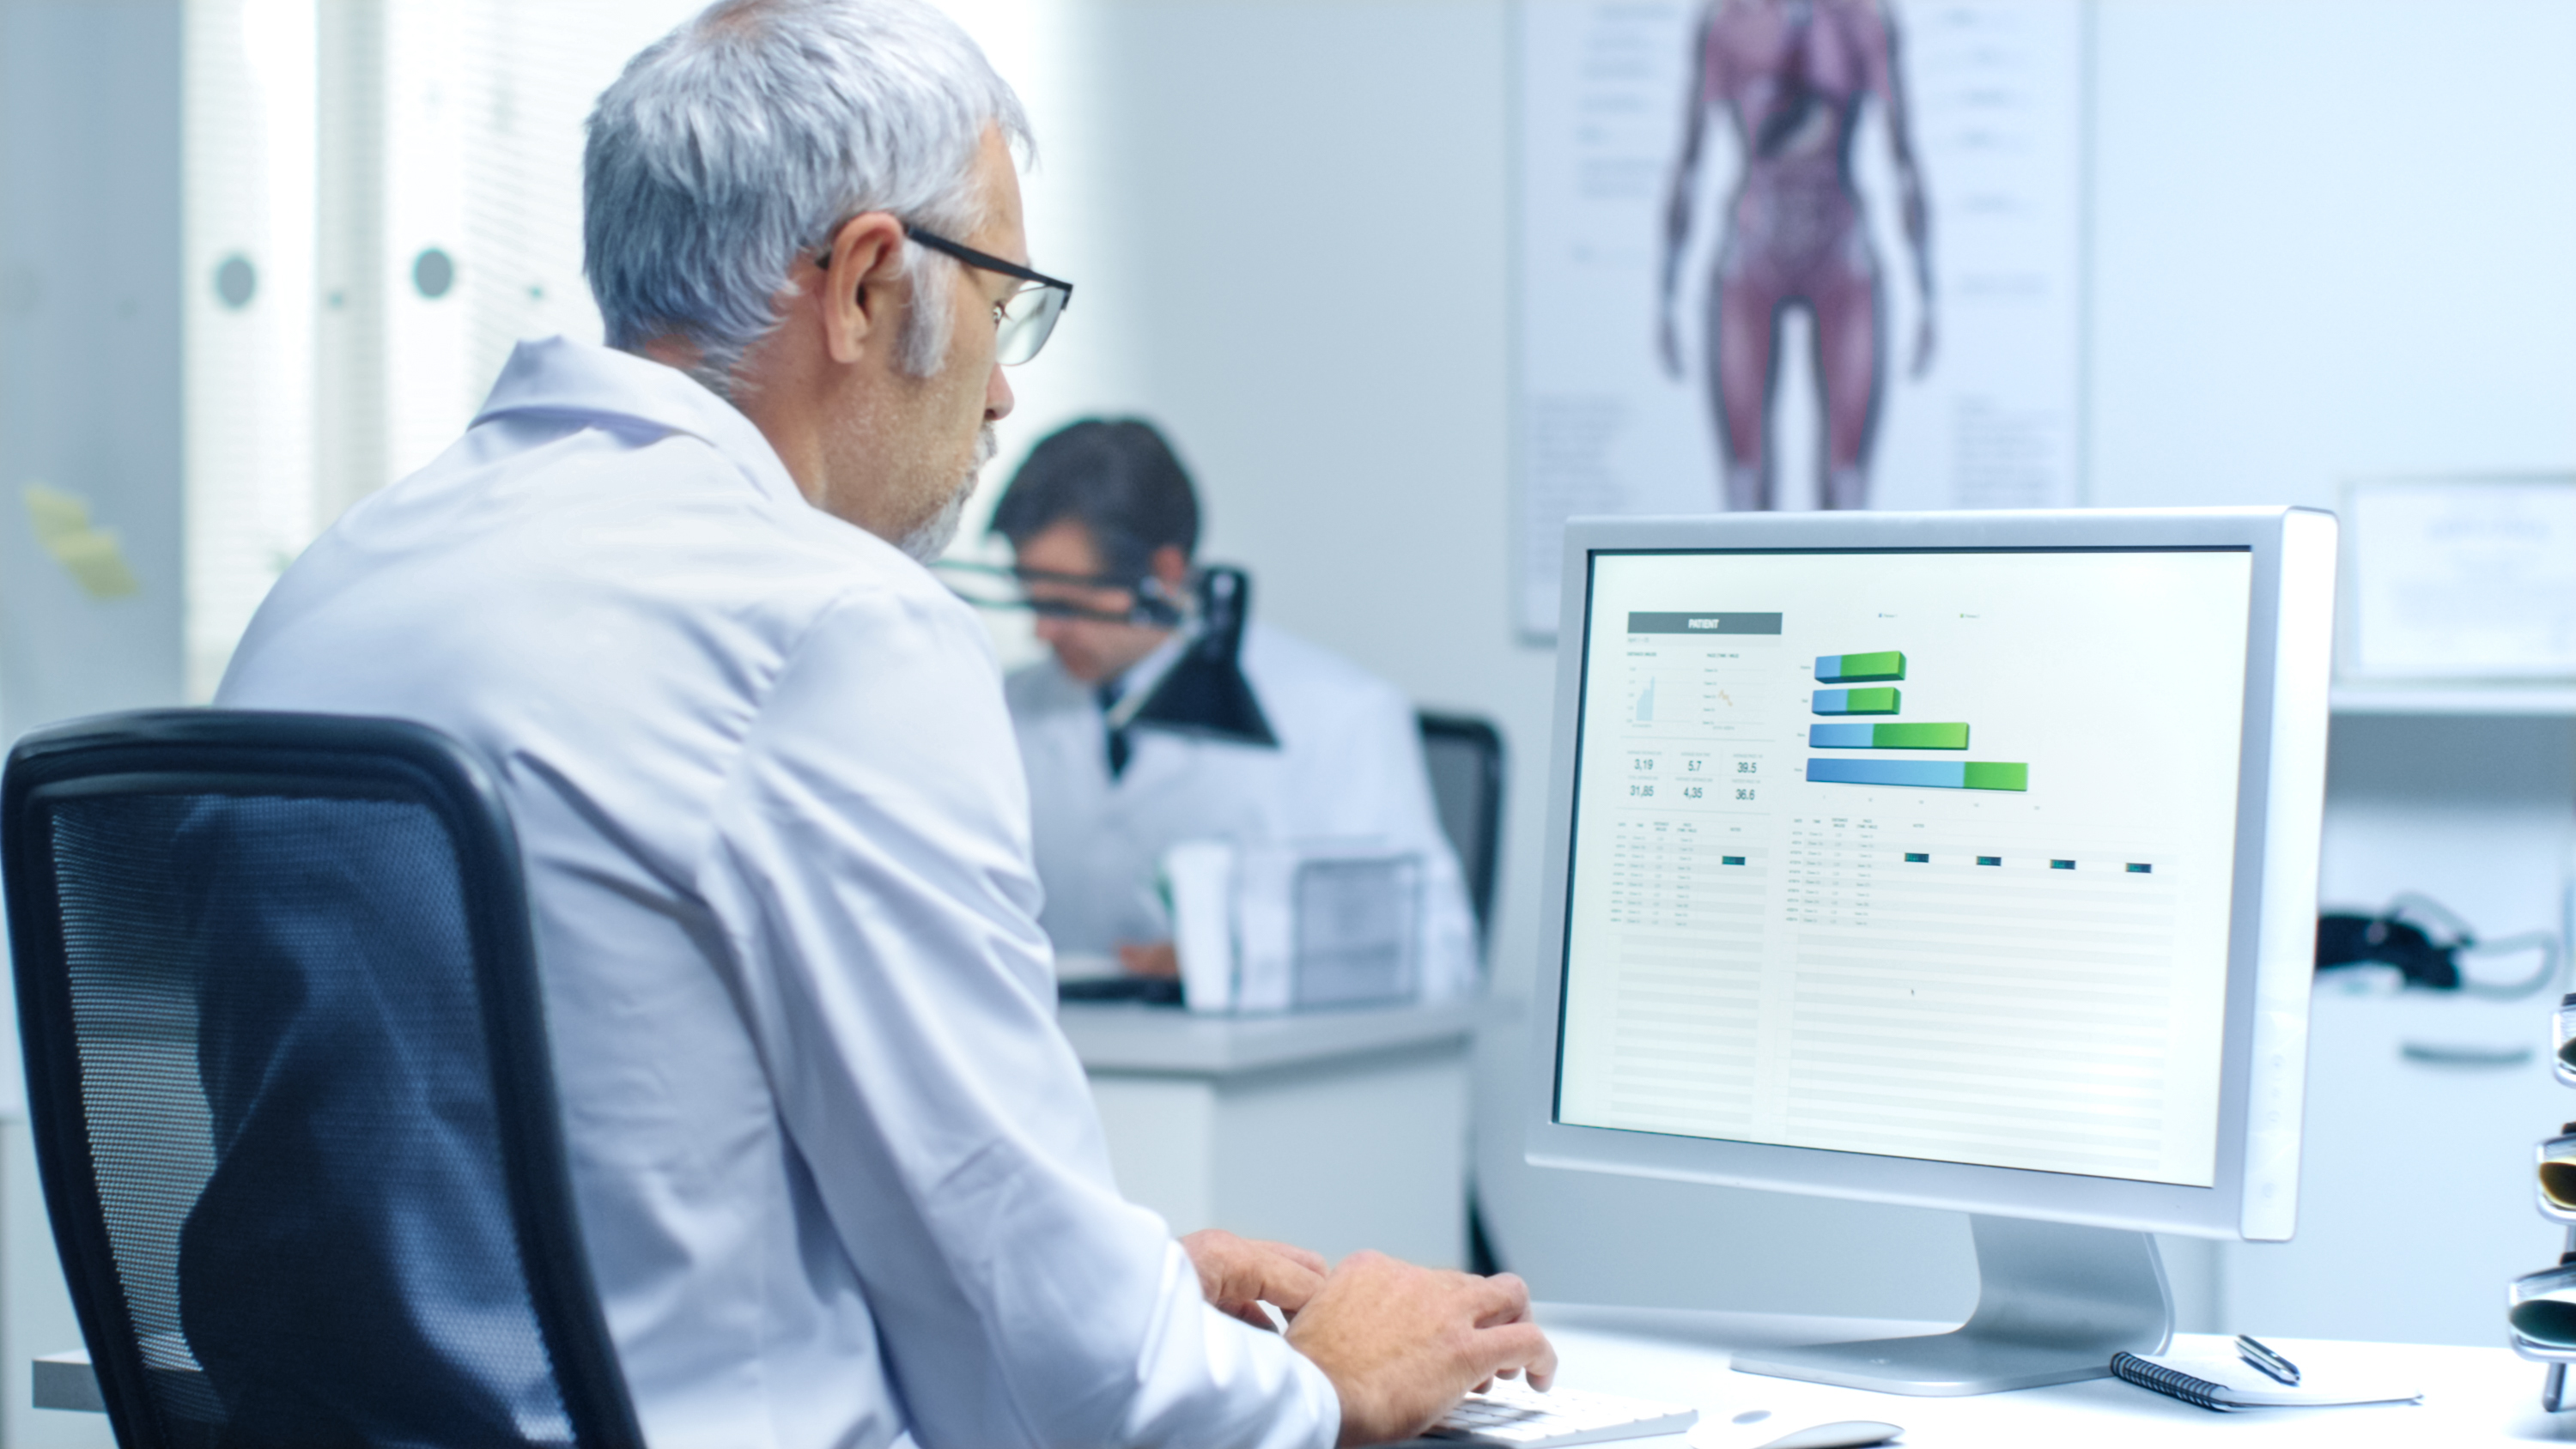 Custom medical inventory management software lets you prepare audit lists, order sheets, training manuals, and reports to share with staff, investors, and clients.